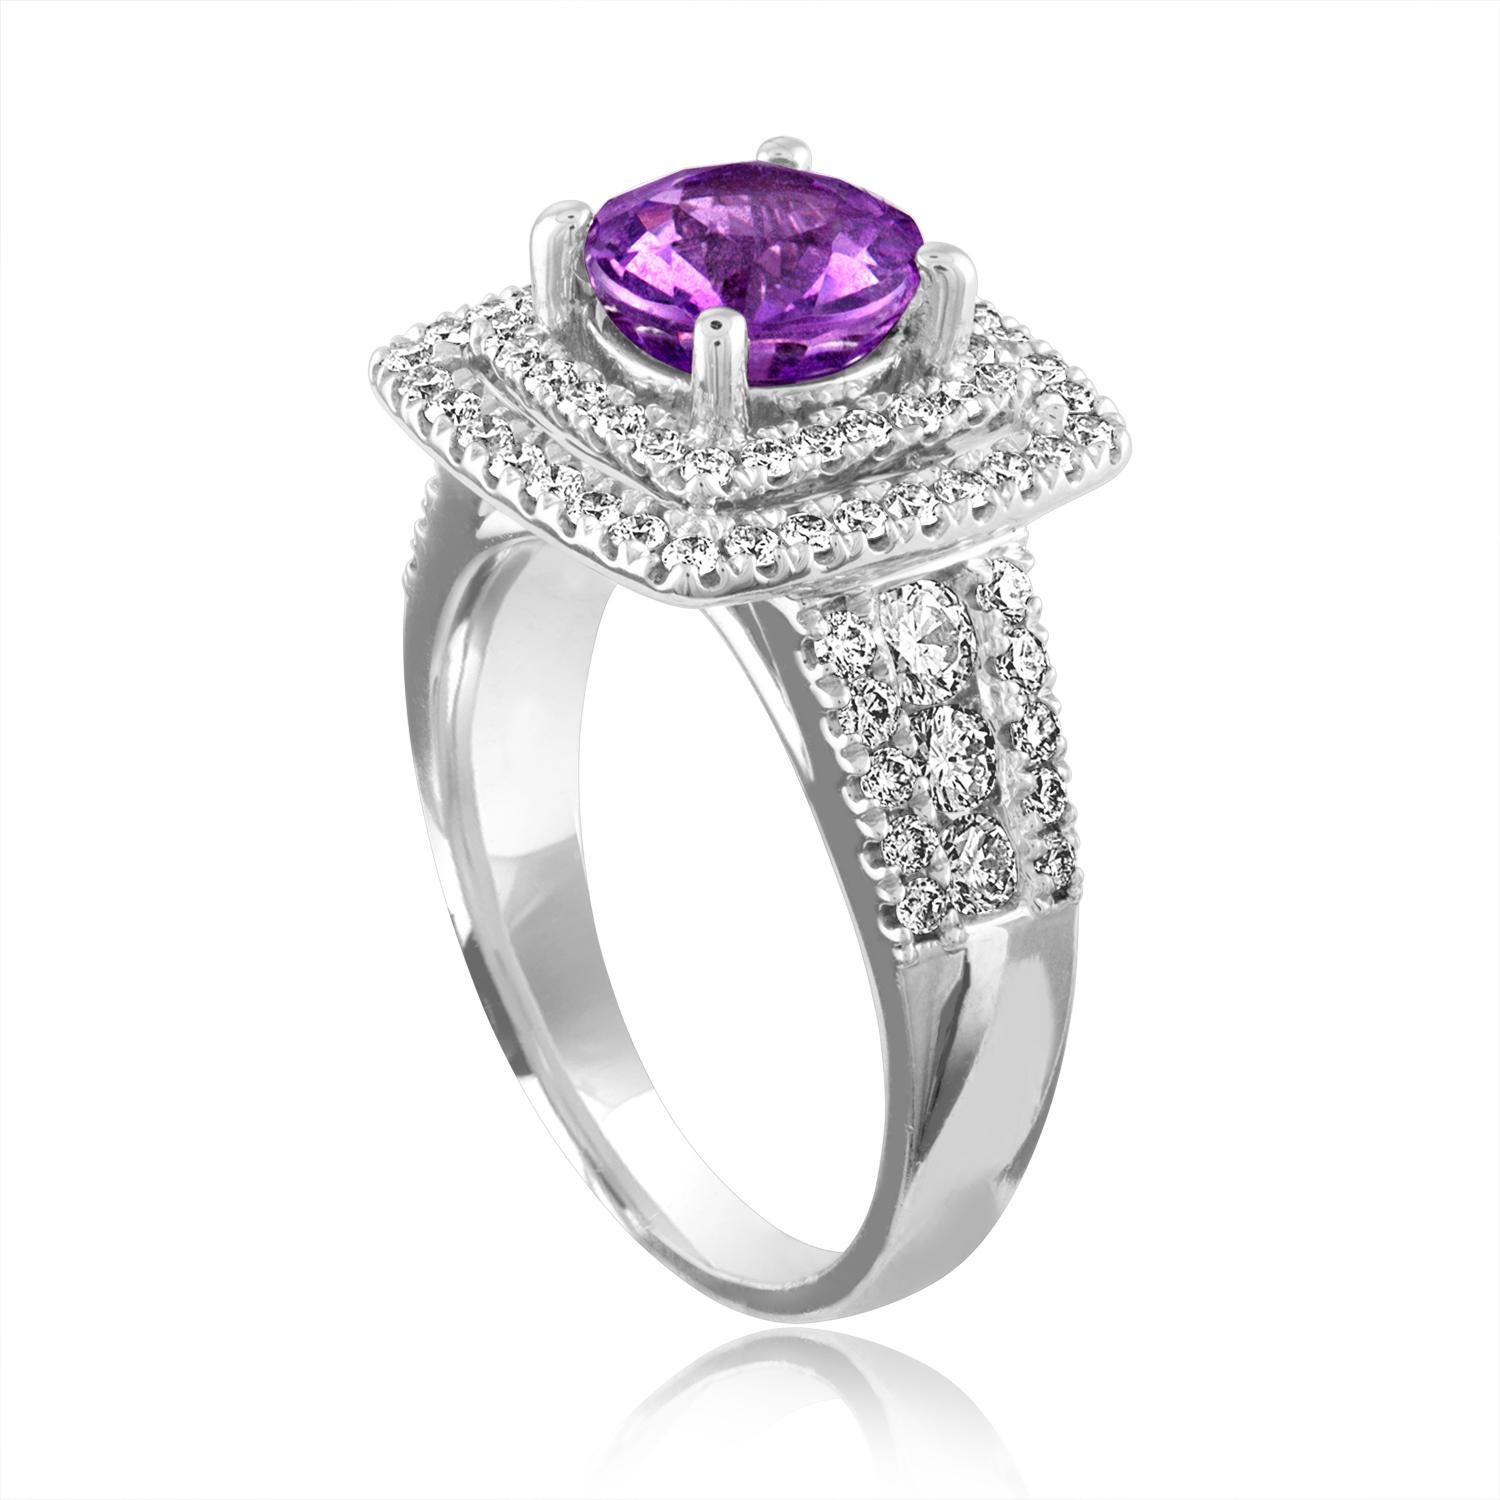 Exquisite Sapphire Surrounded by Double Diamond Halo
The ring is 18K White Gold
The Round Sapphire is Pinkish Violet 1.97 Carats
The Sapphire is Certified By LAPIS NO HEAT
There are 1.25 Carats in Diamonds F/G VS/SI
The ring is a size 6.00,